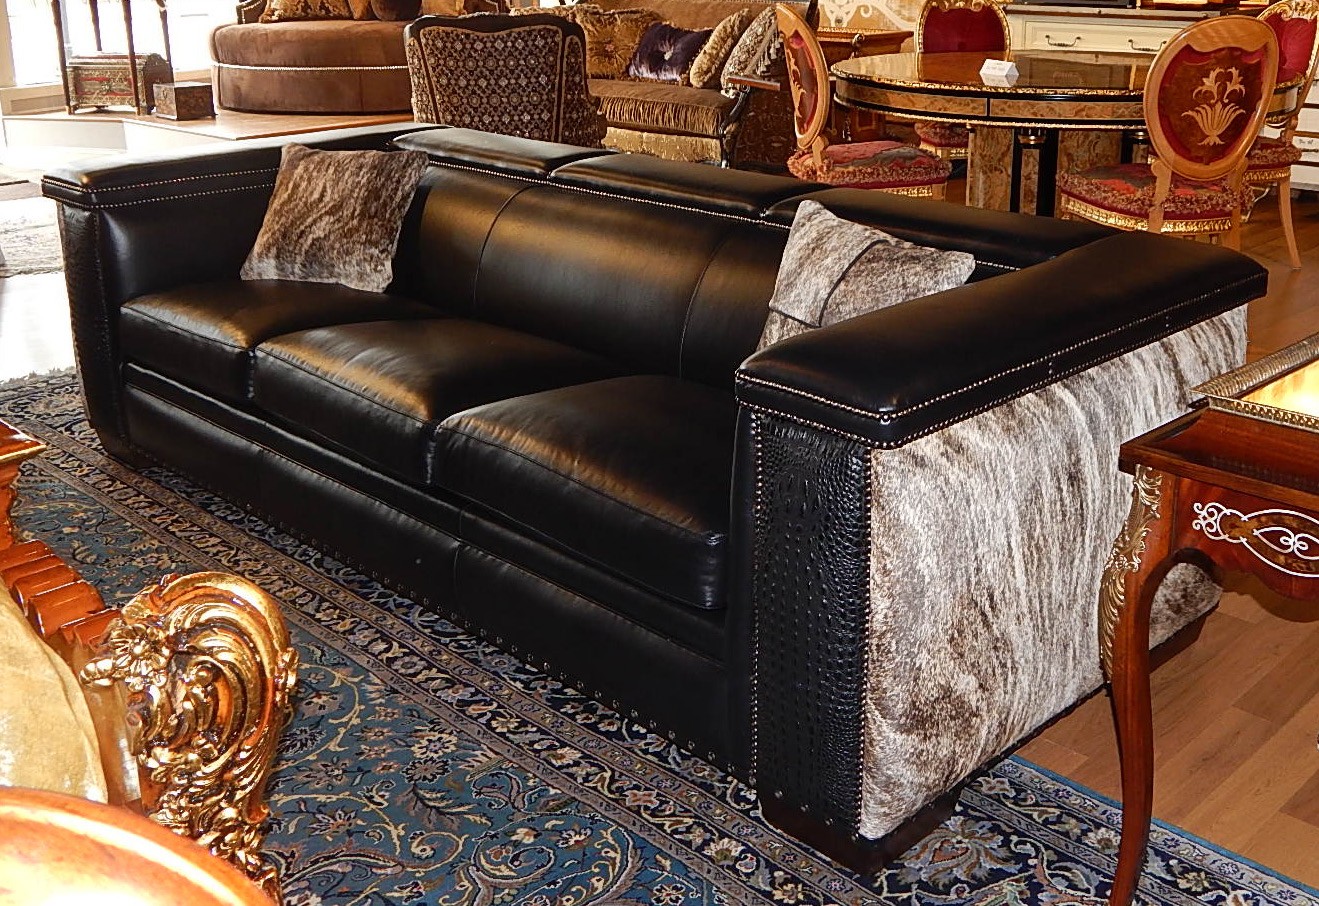 SOFA, COUCH & LOVESEAT Best of transitional and western designed luxury sofa